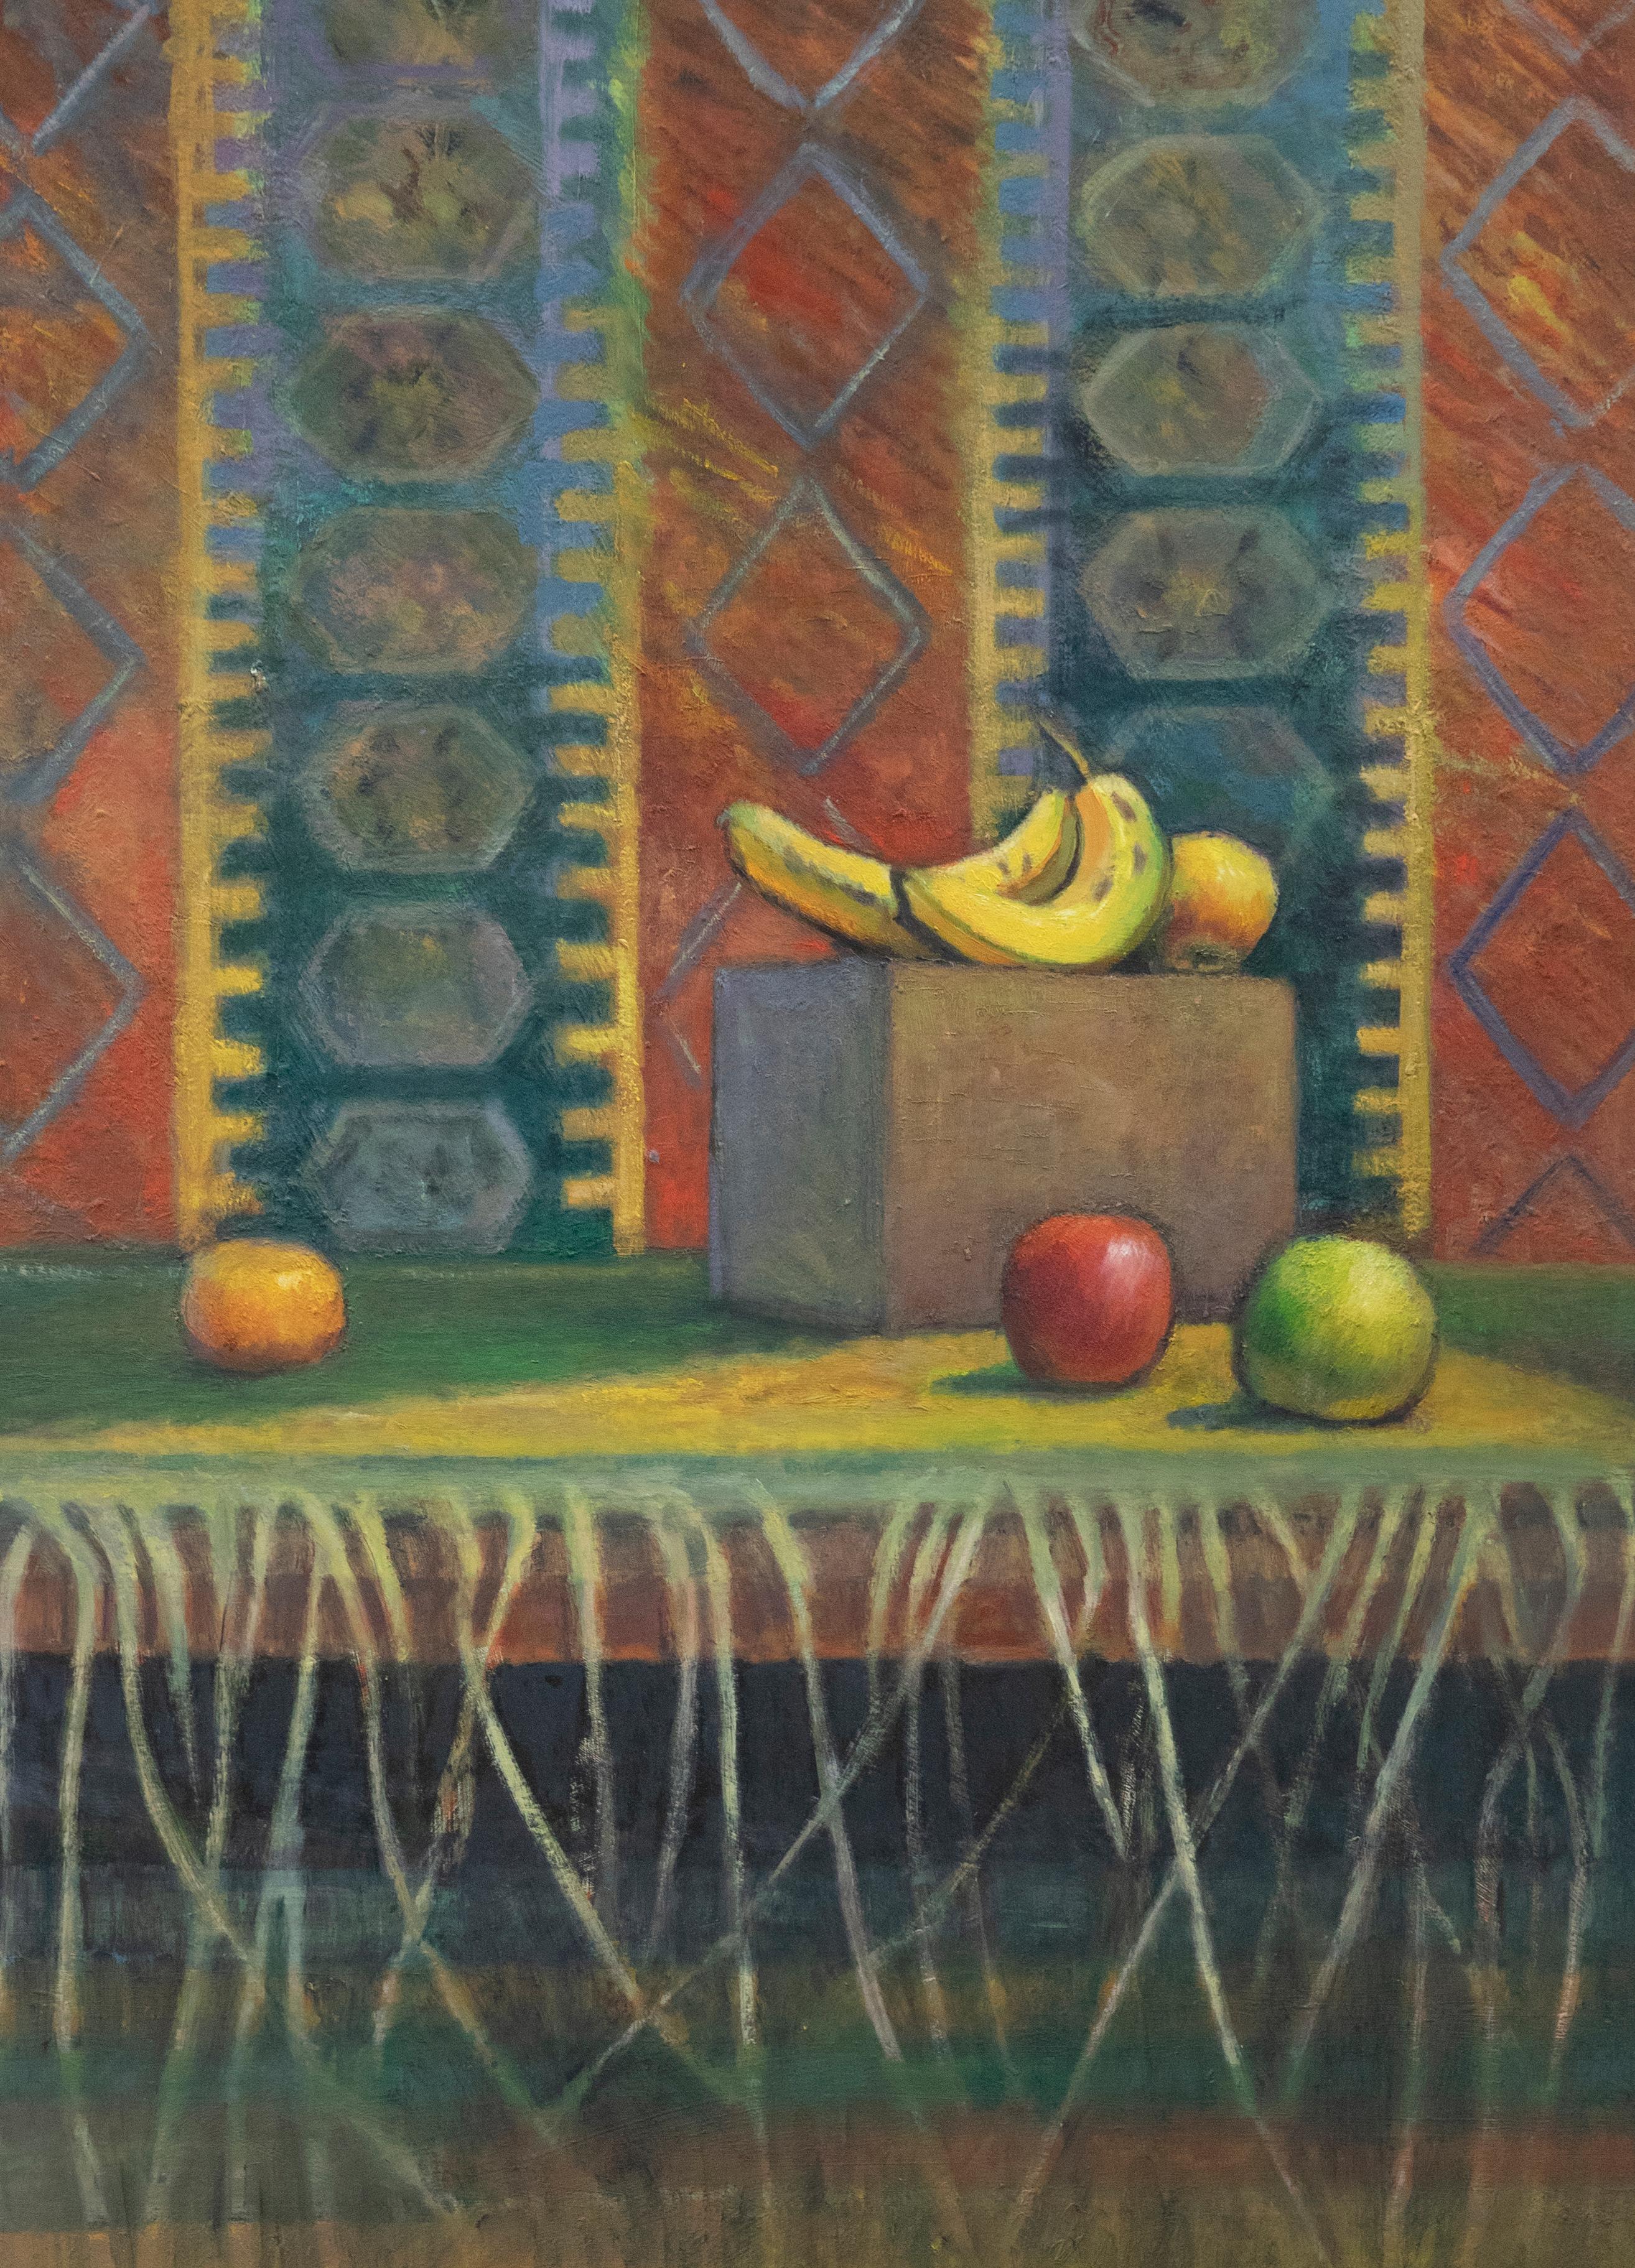 A delightful still life study depicting oranges and apples carefully placed before a patterned wall hanging. The artist uses a vibrant palette capturing the bold primary colours the textiles for a vibrant backdrop to the still life objects.